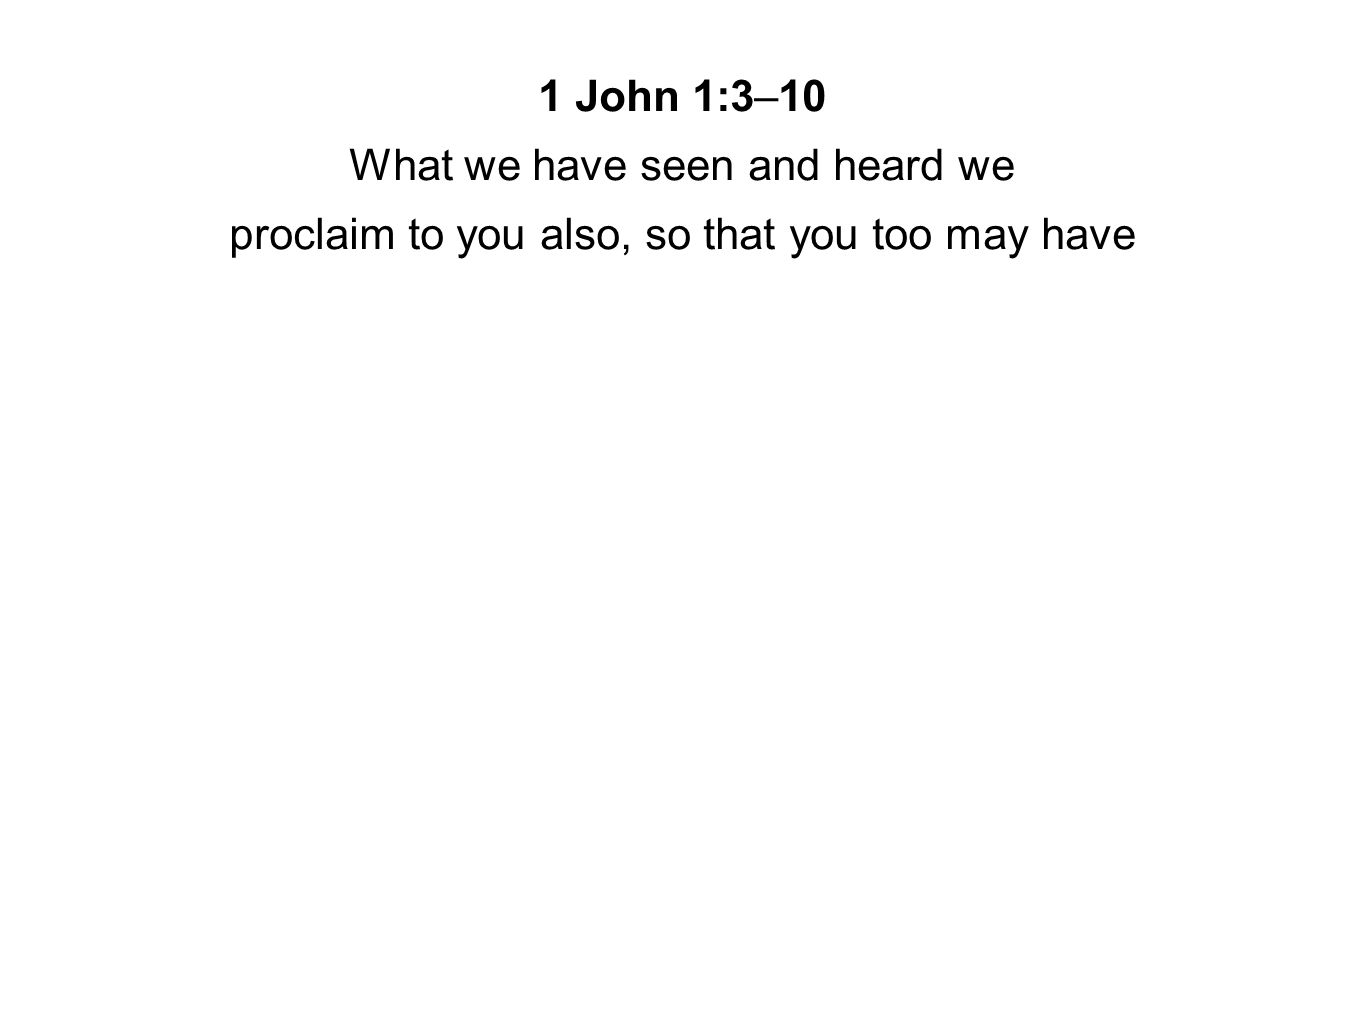 1 John 1:3–10 What we have seen and heard we proclaim to you also, so that you too may have